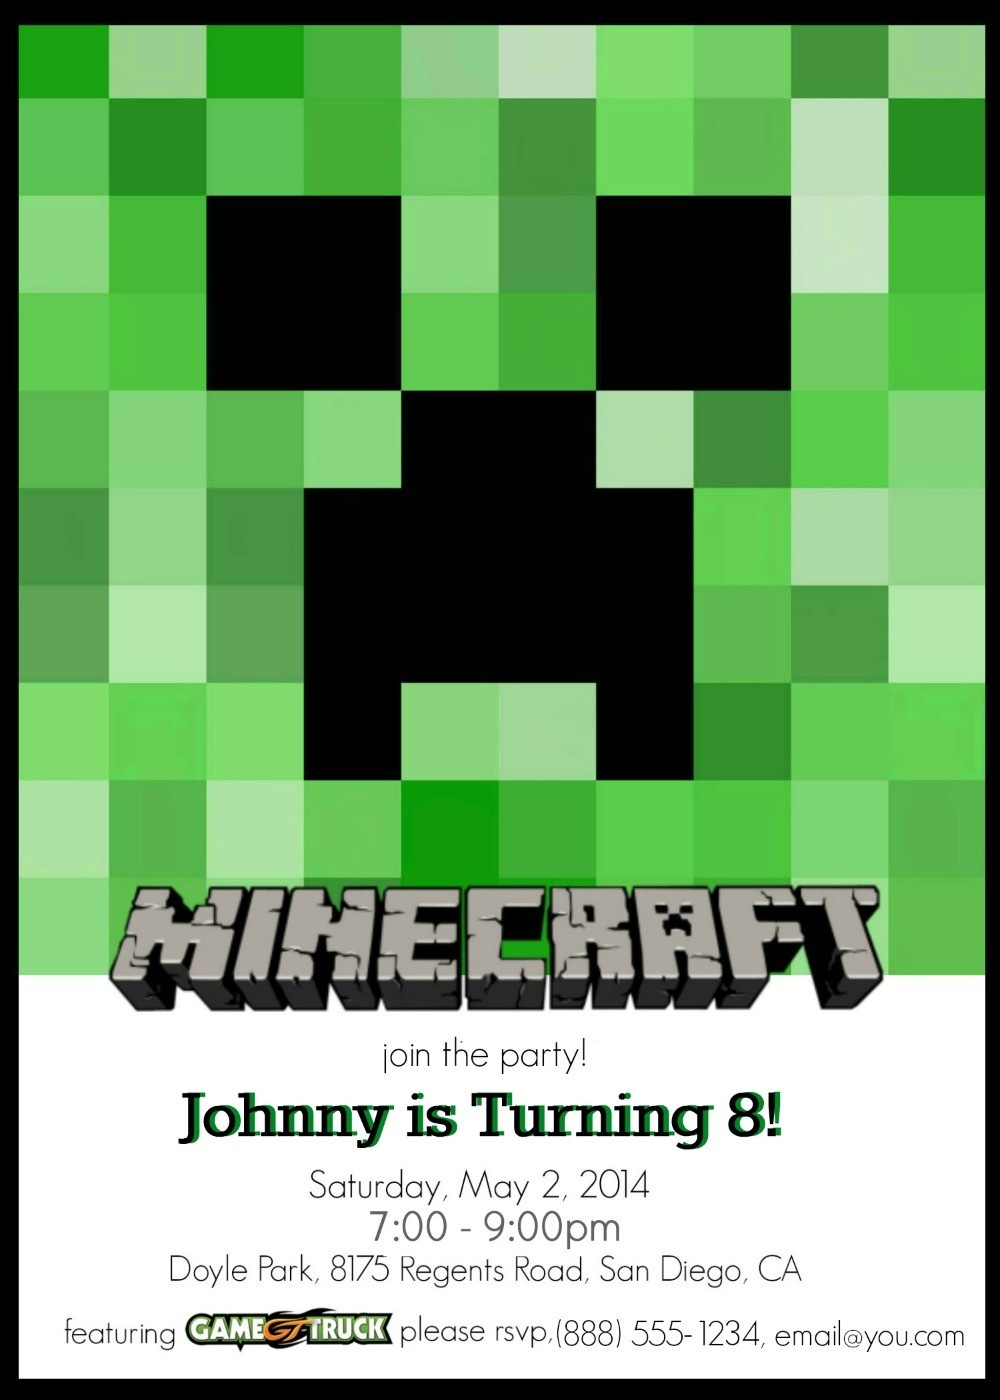 Make Your Own Custom Printable Minecraft Party Invitations - Make Printable Party Invitations Online Free